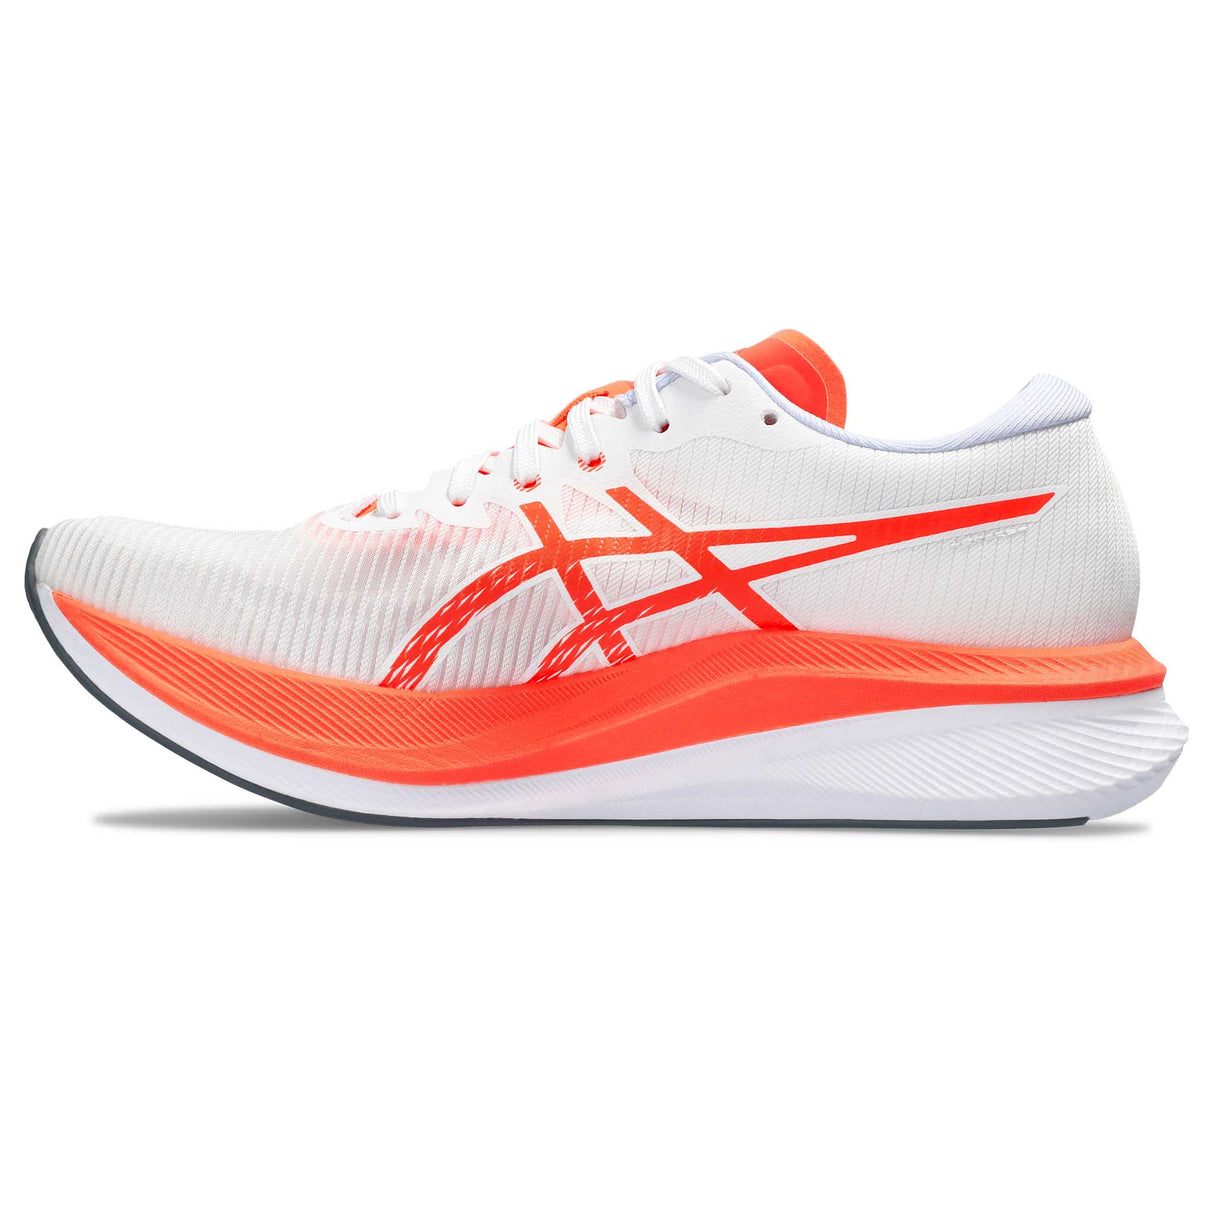 ASICS Magic Speed 3 souliers de course femme lateral- White / Sunrise Red